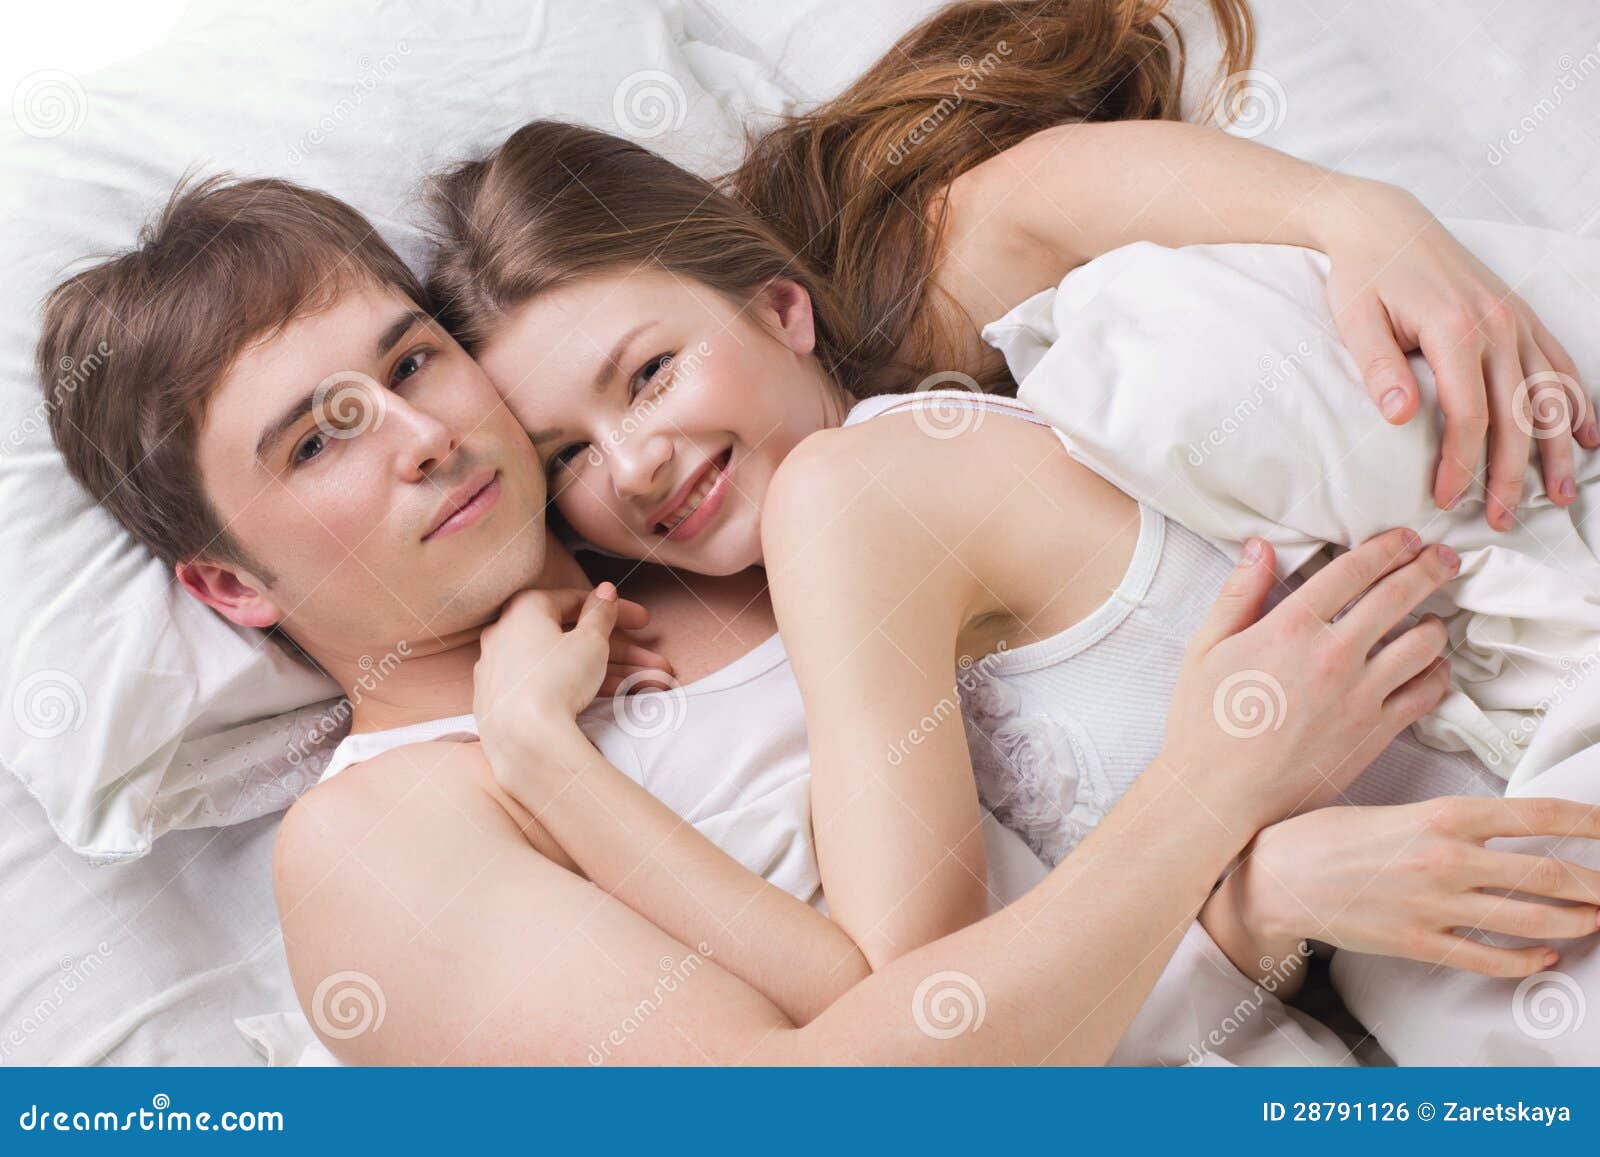 Young Man And Woman In A Bed Stock Photo   Image of bedtime 